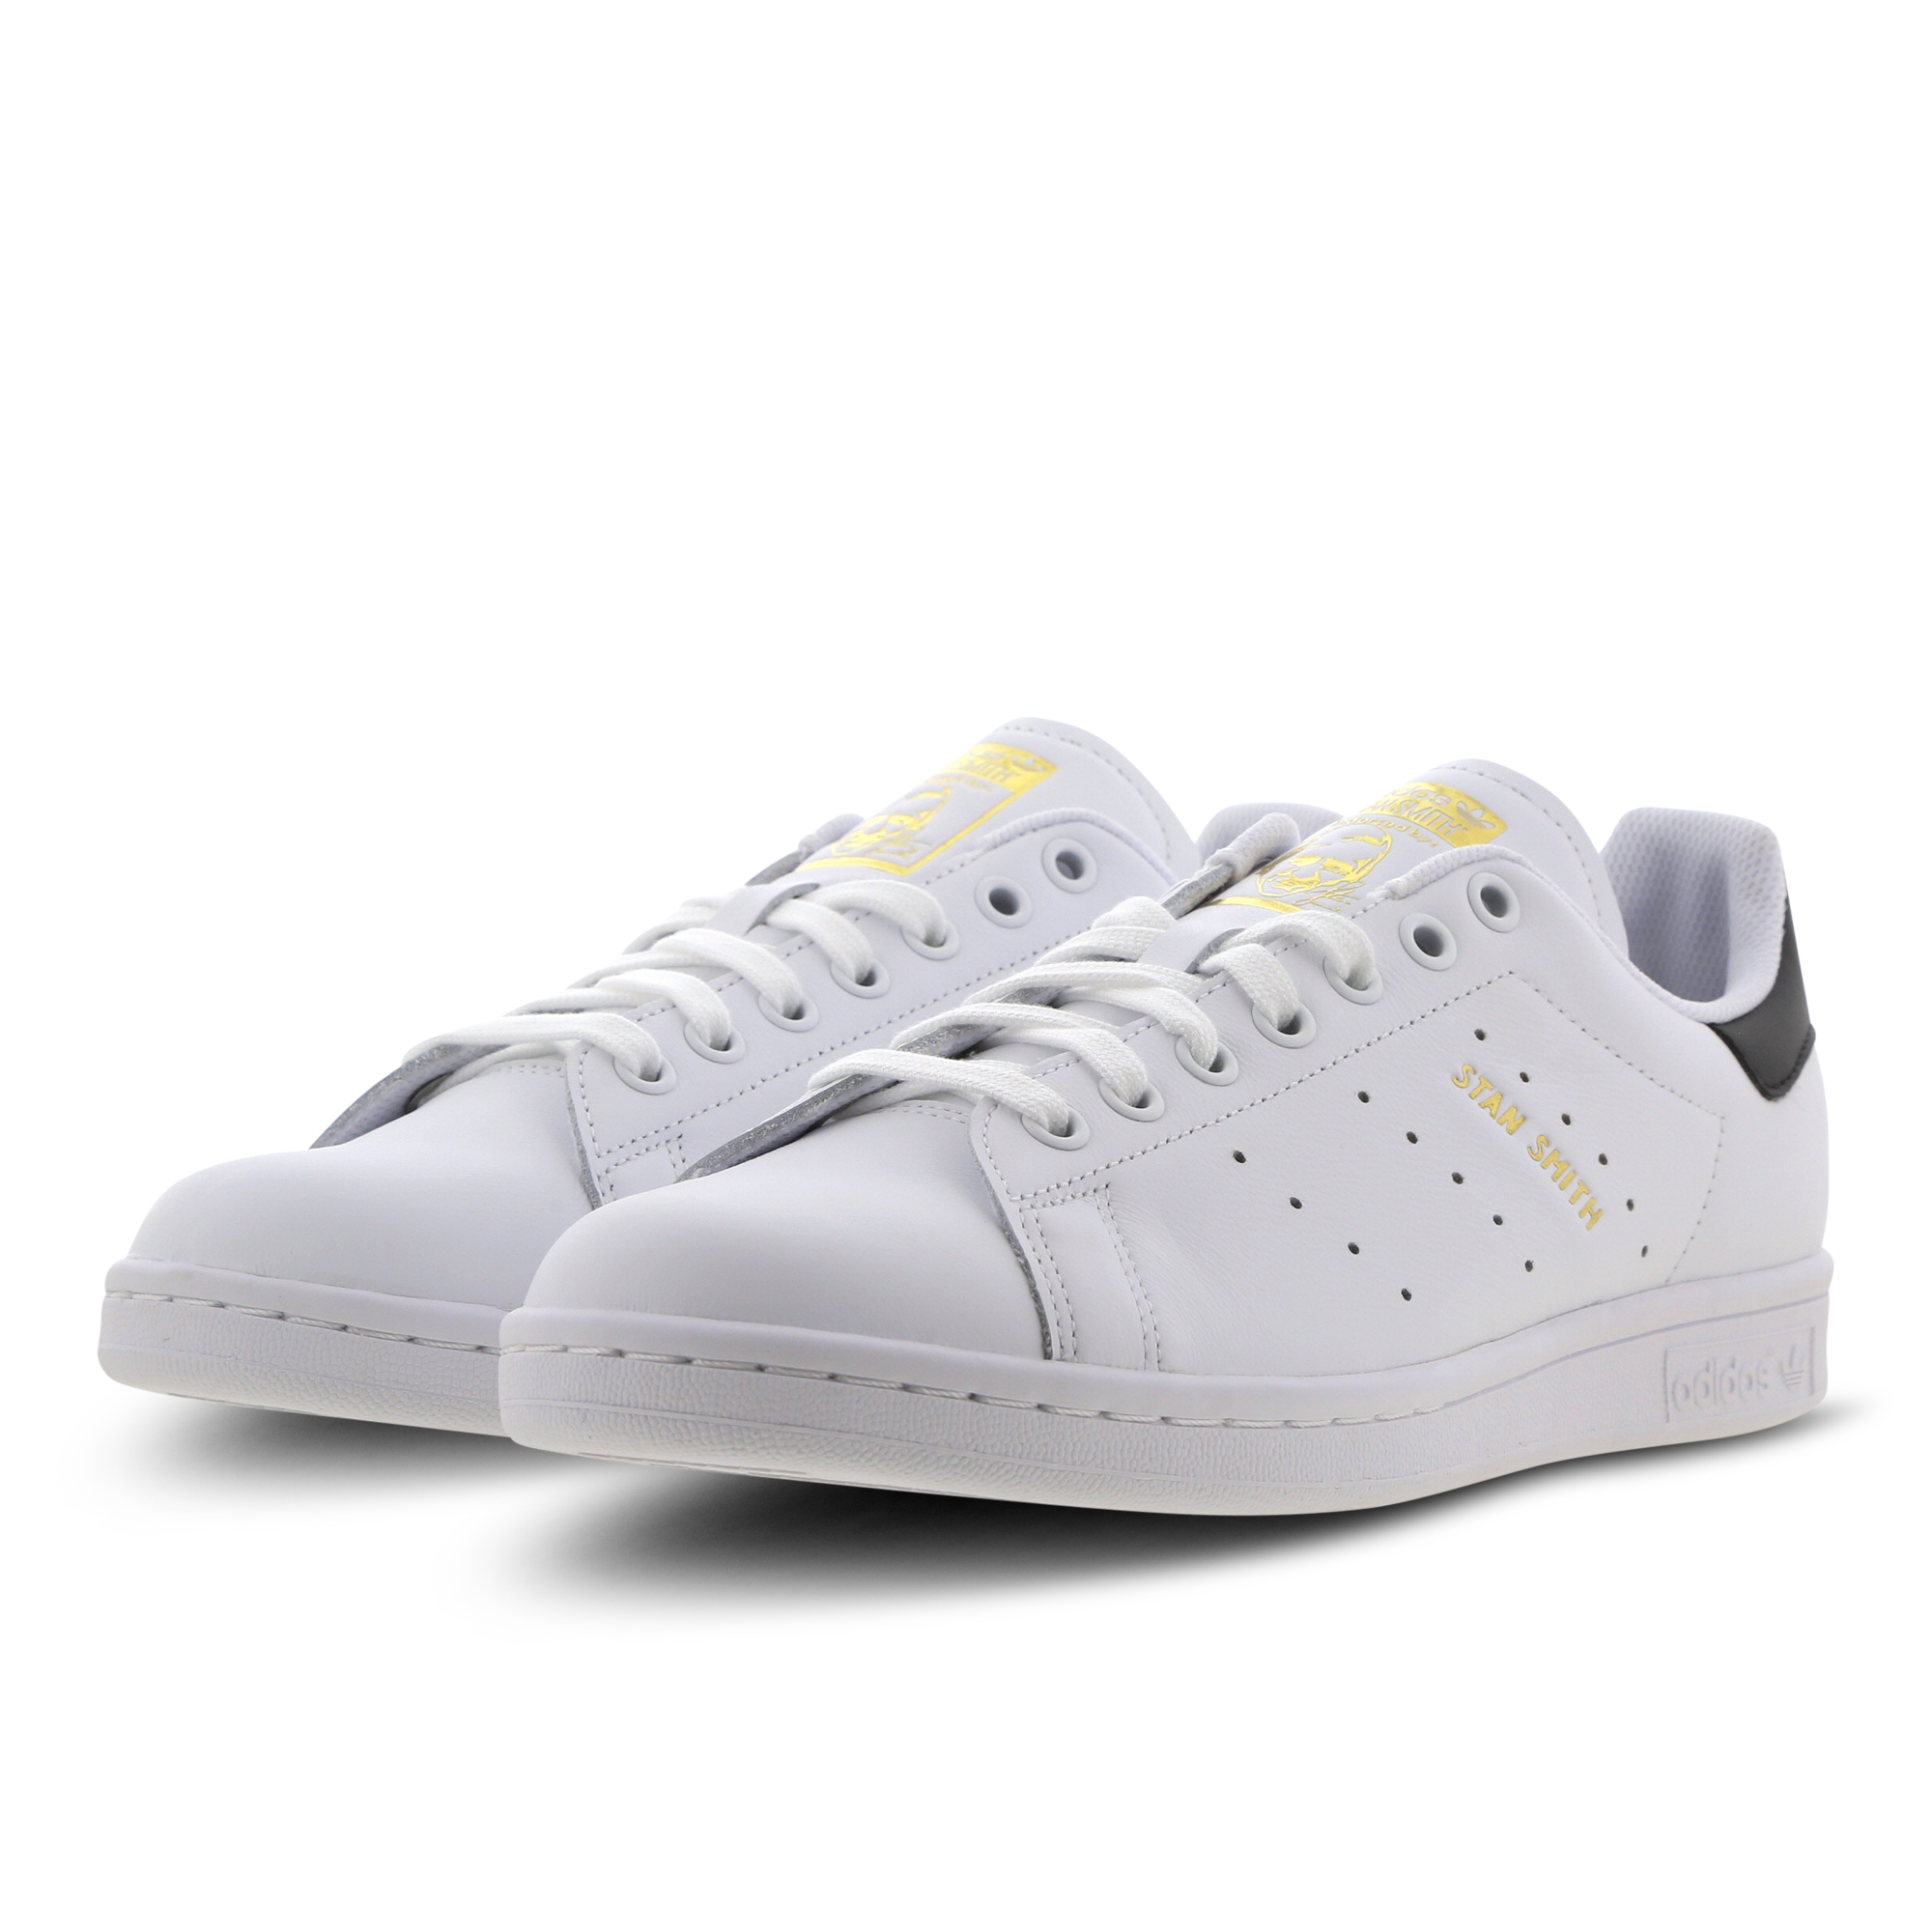 stan smith black and white mens